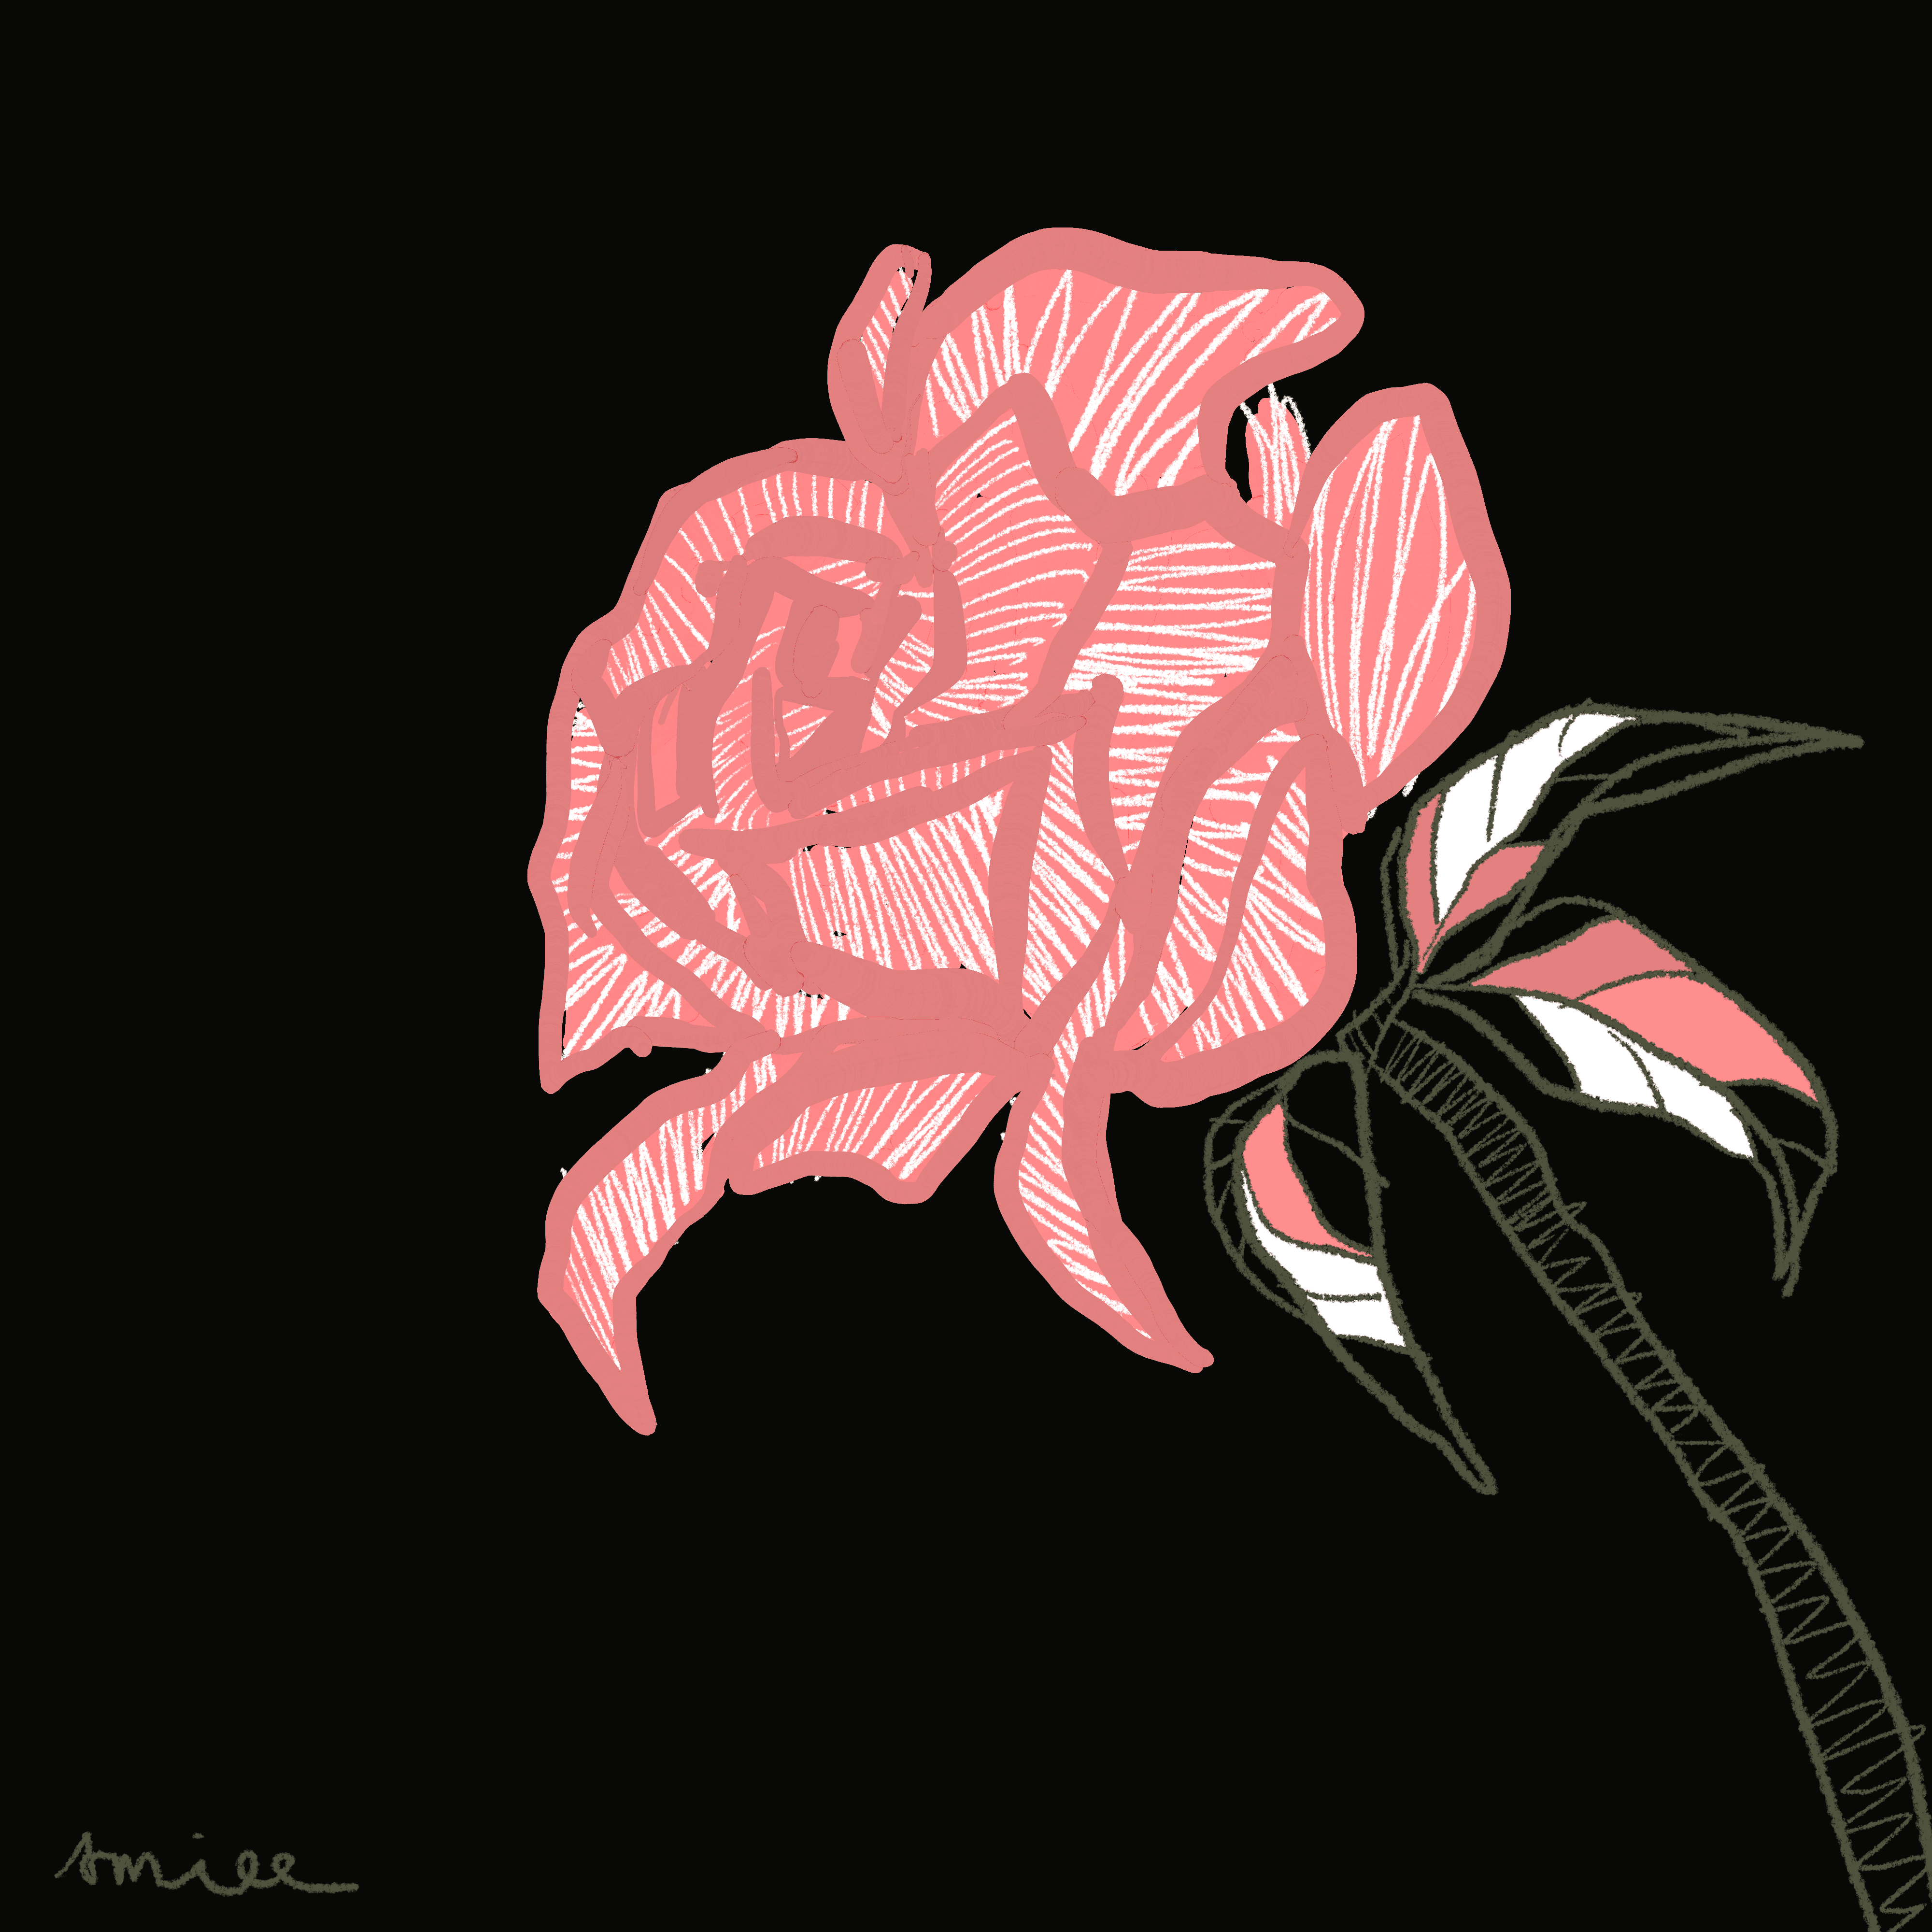 A rose lost in thought